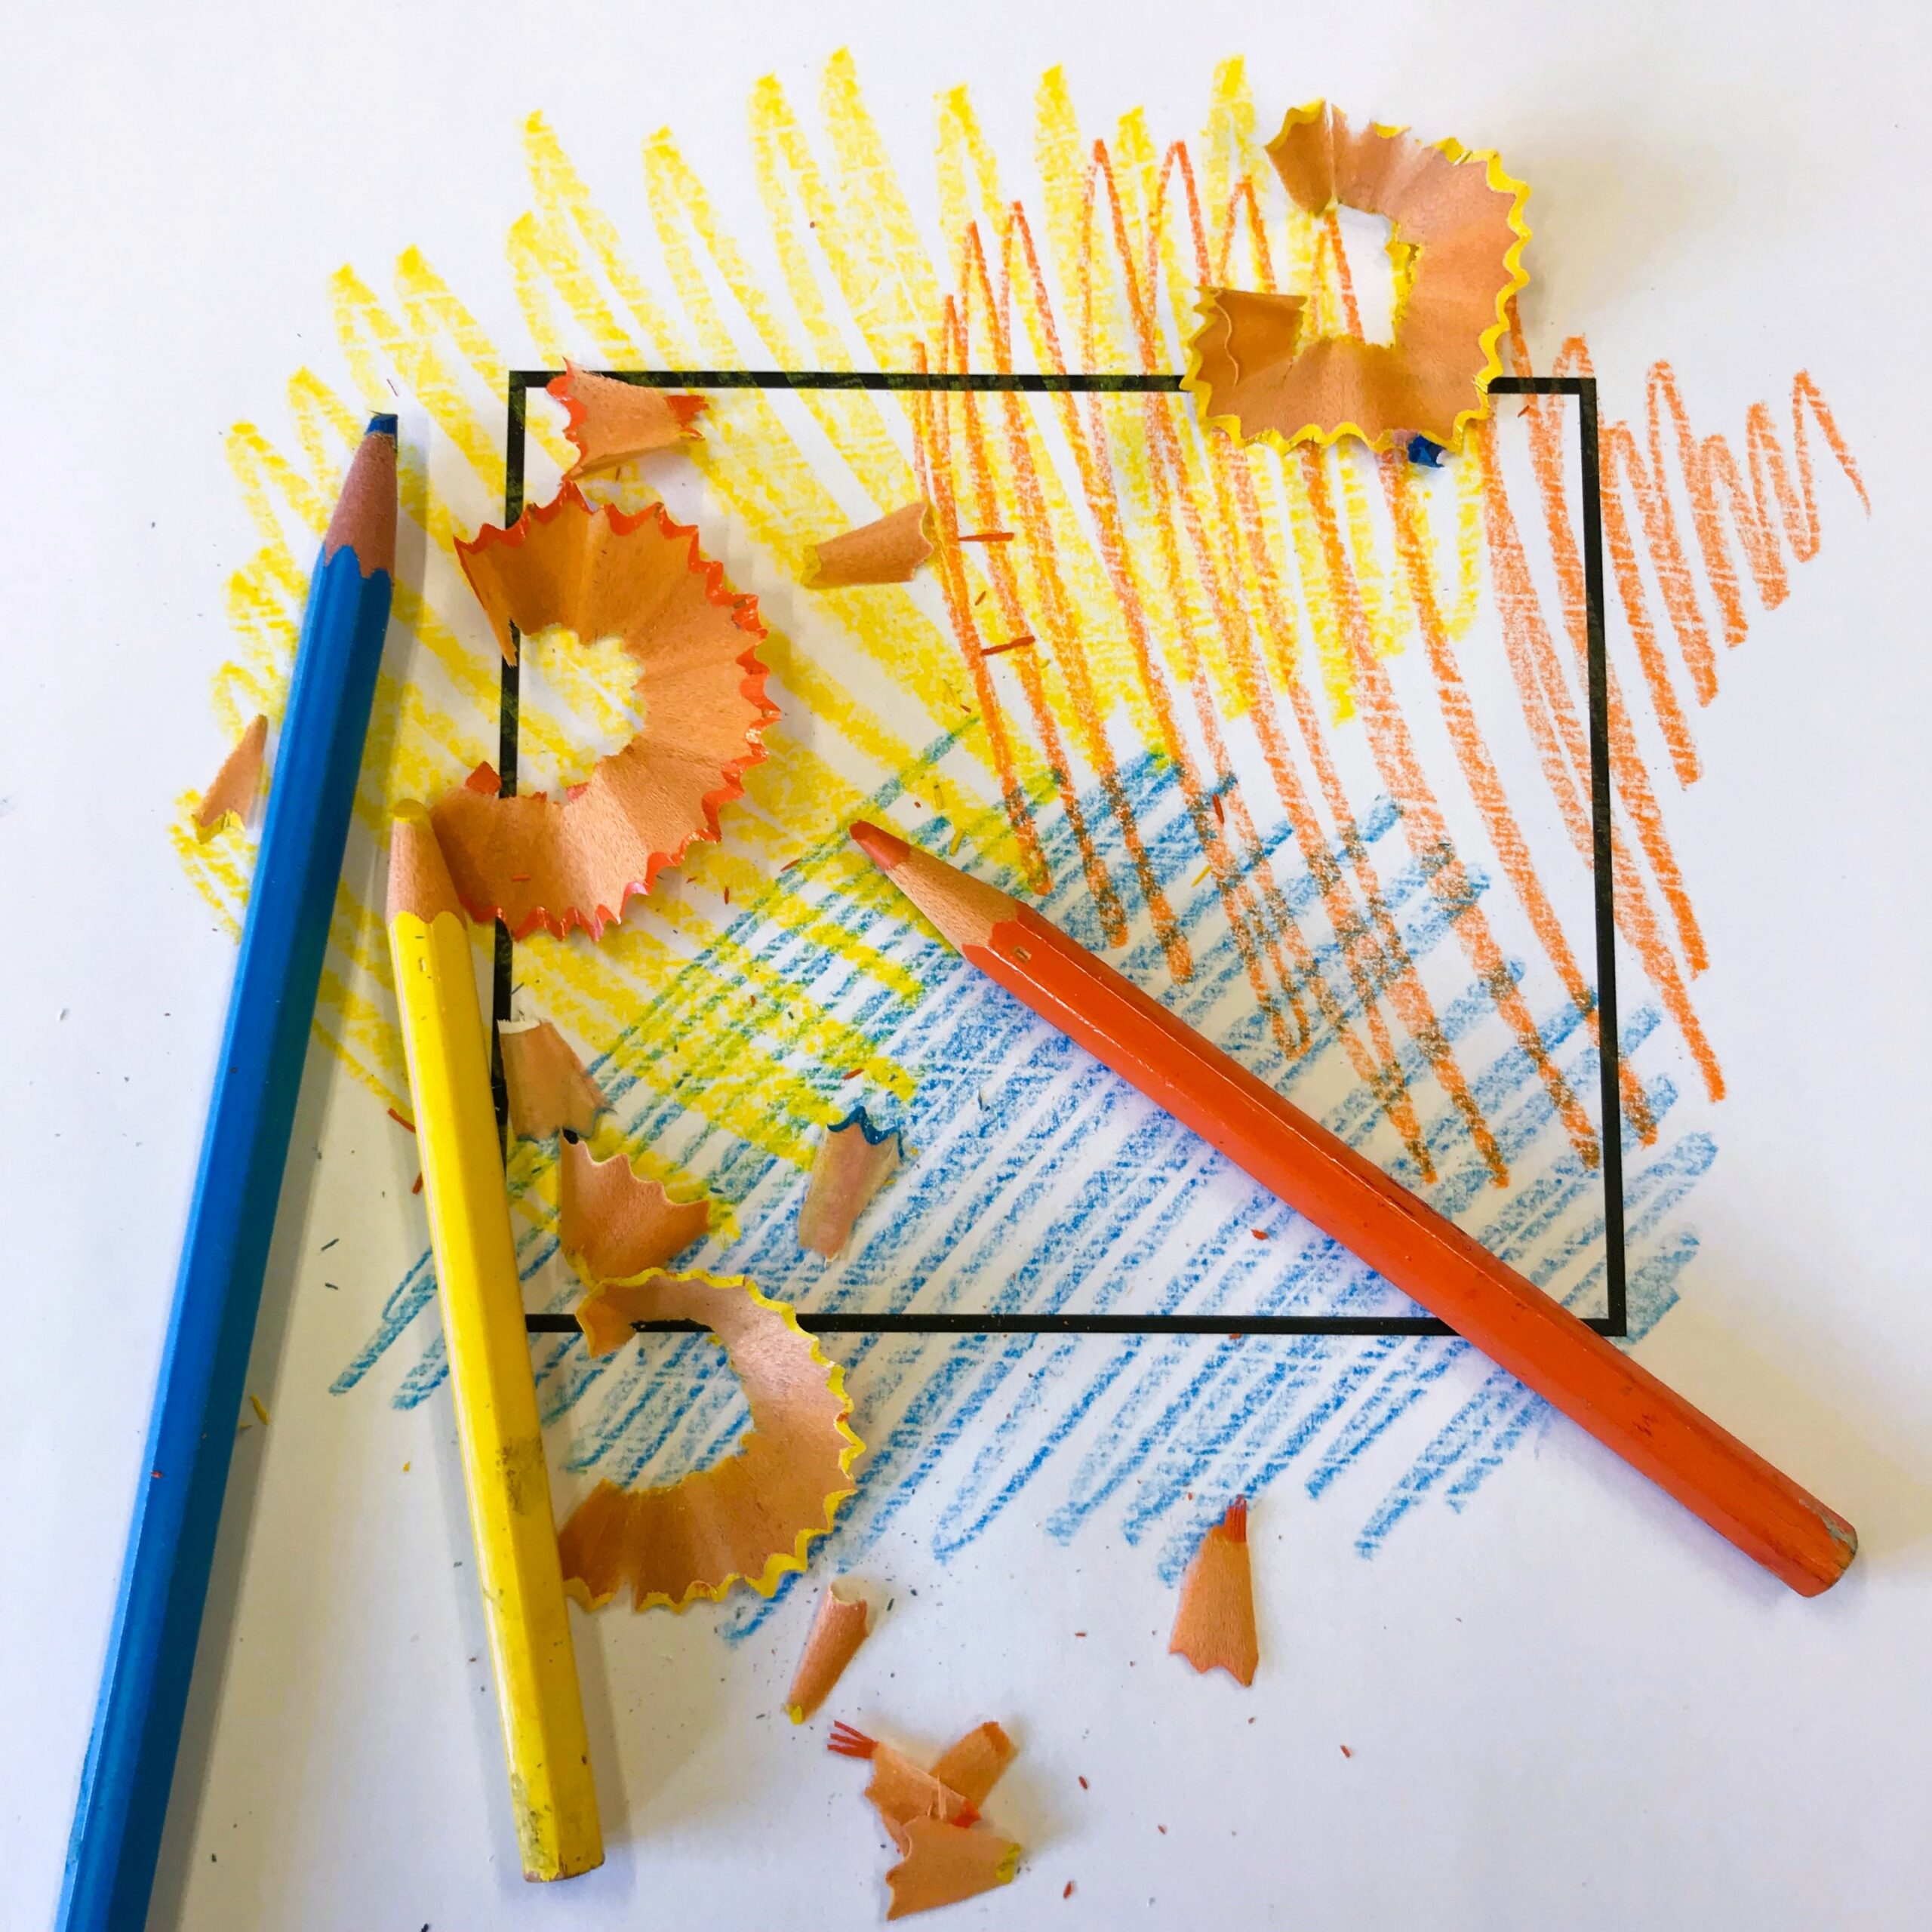 colouring pencils and sharpenings over the top of a coloured in square